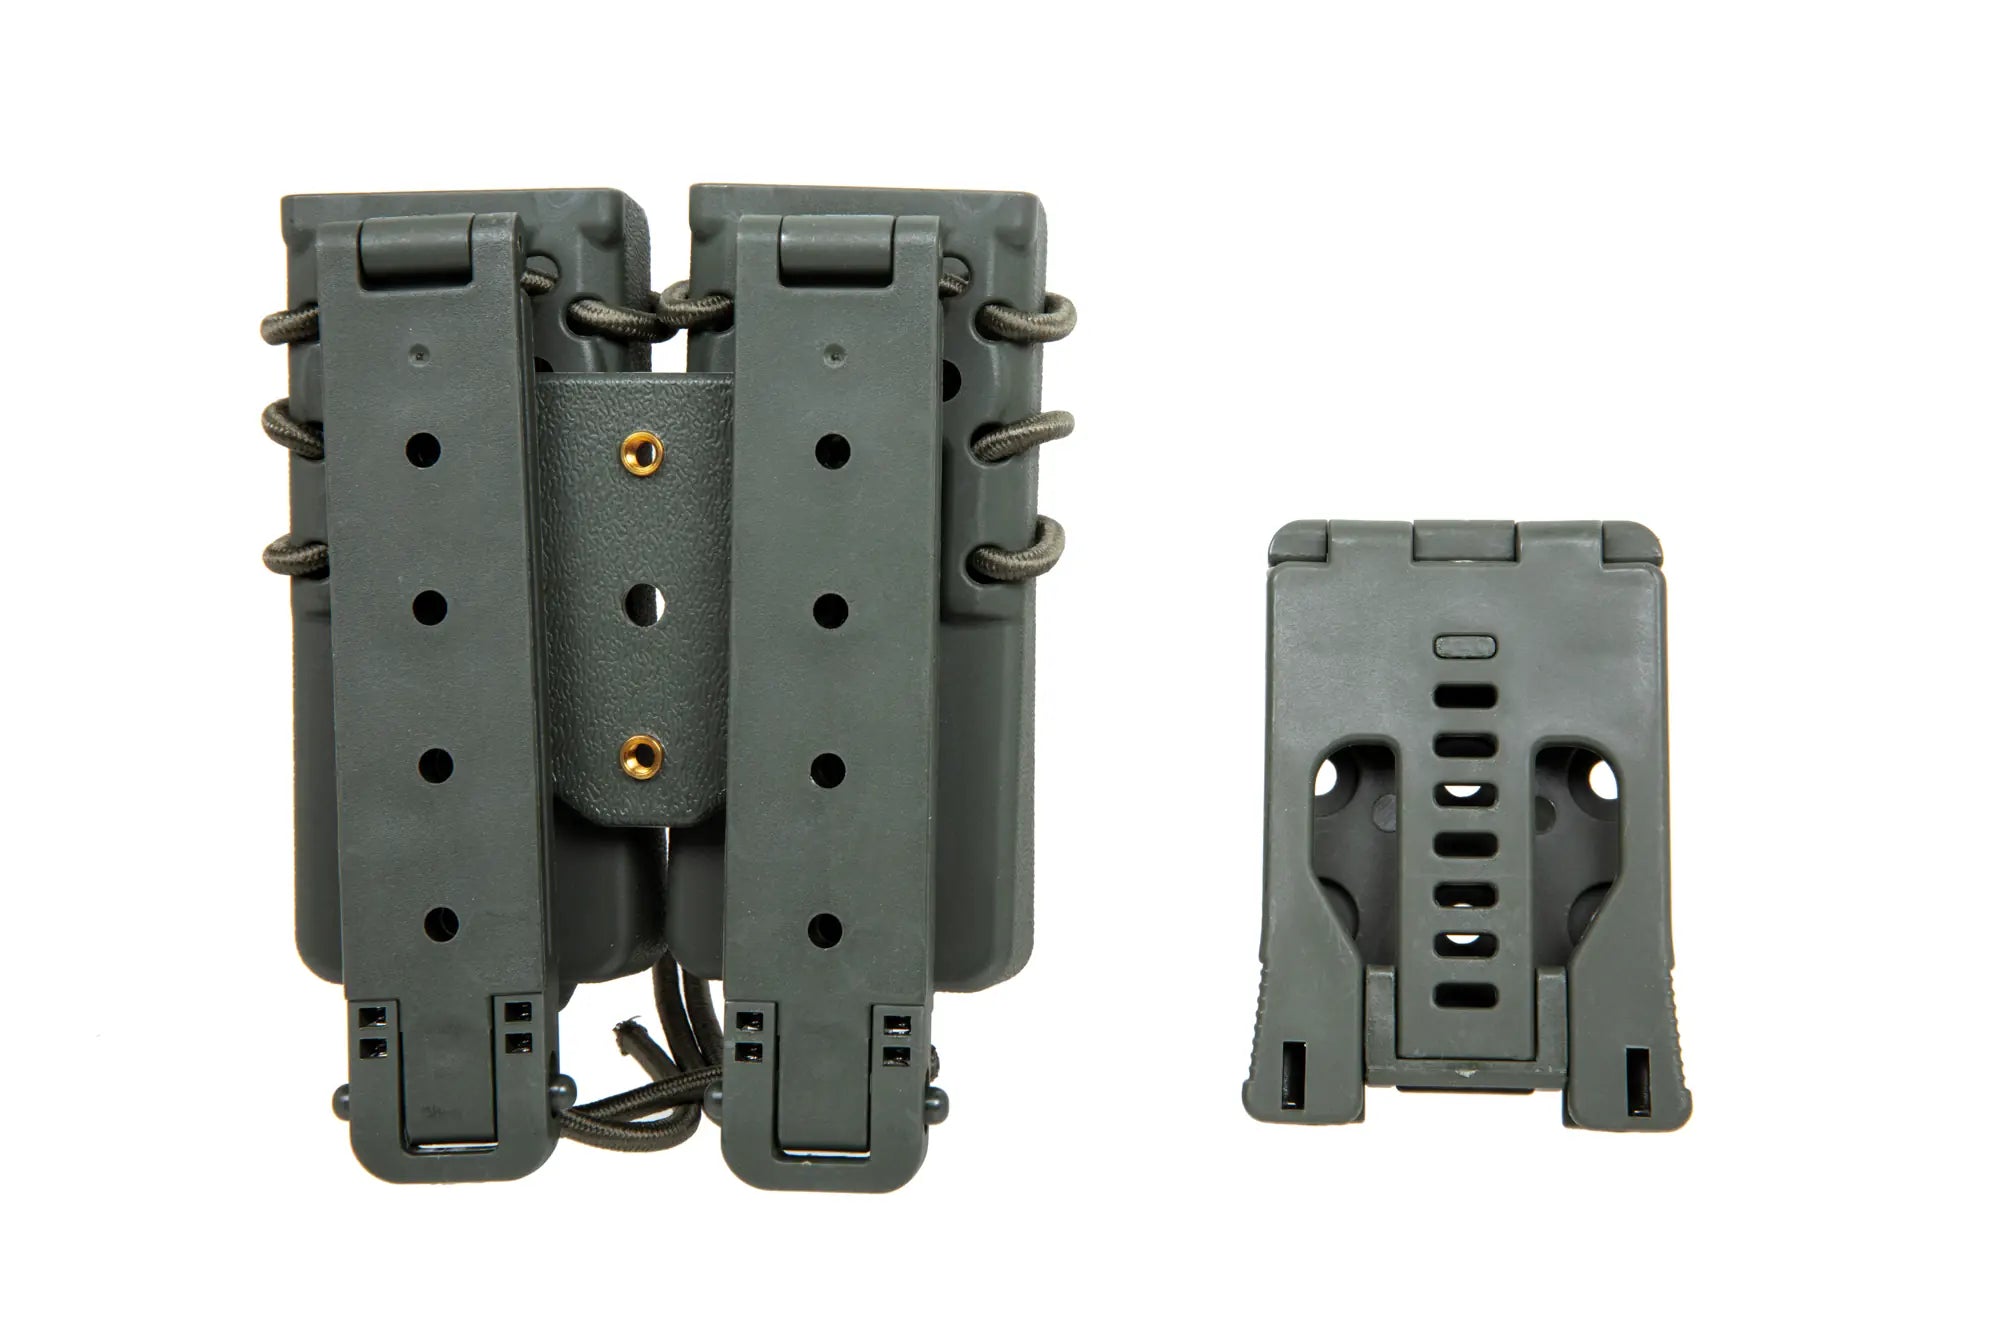 Carrier for 2 9mm magazines Wosport Urban Assault Long Quick Pull Olive-1